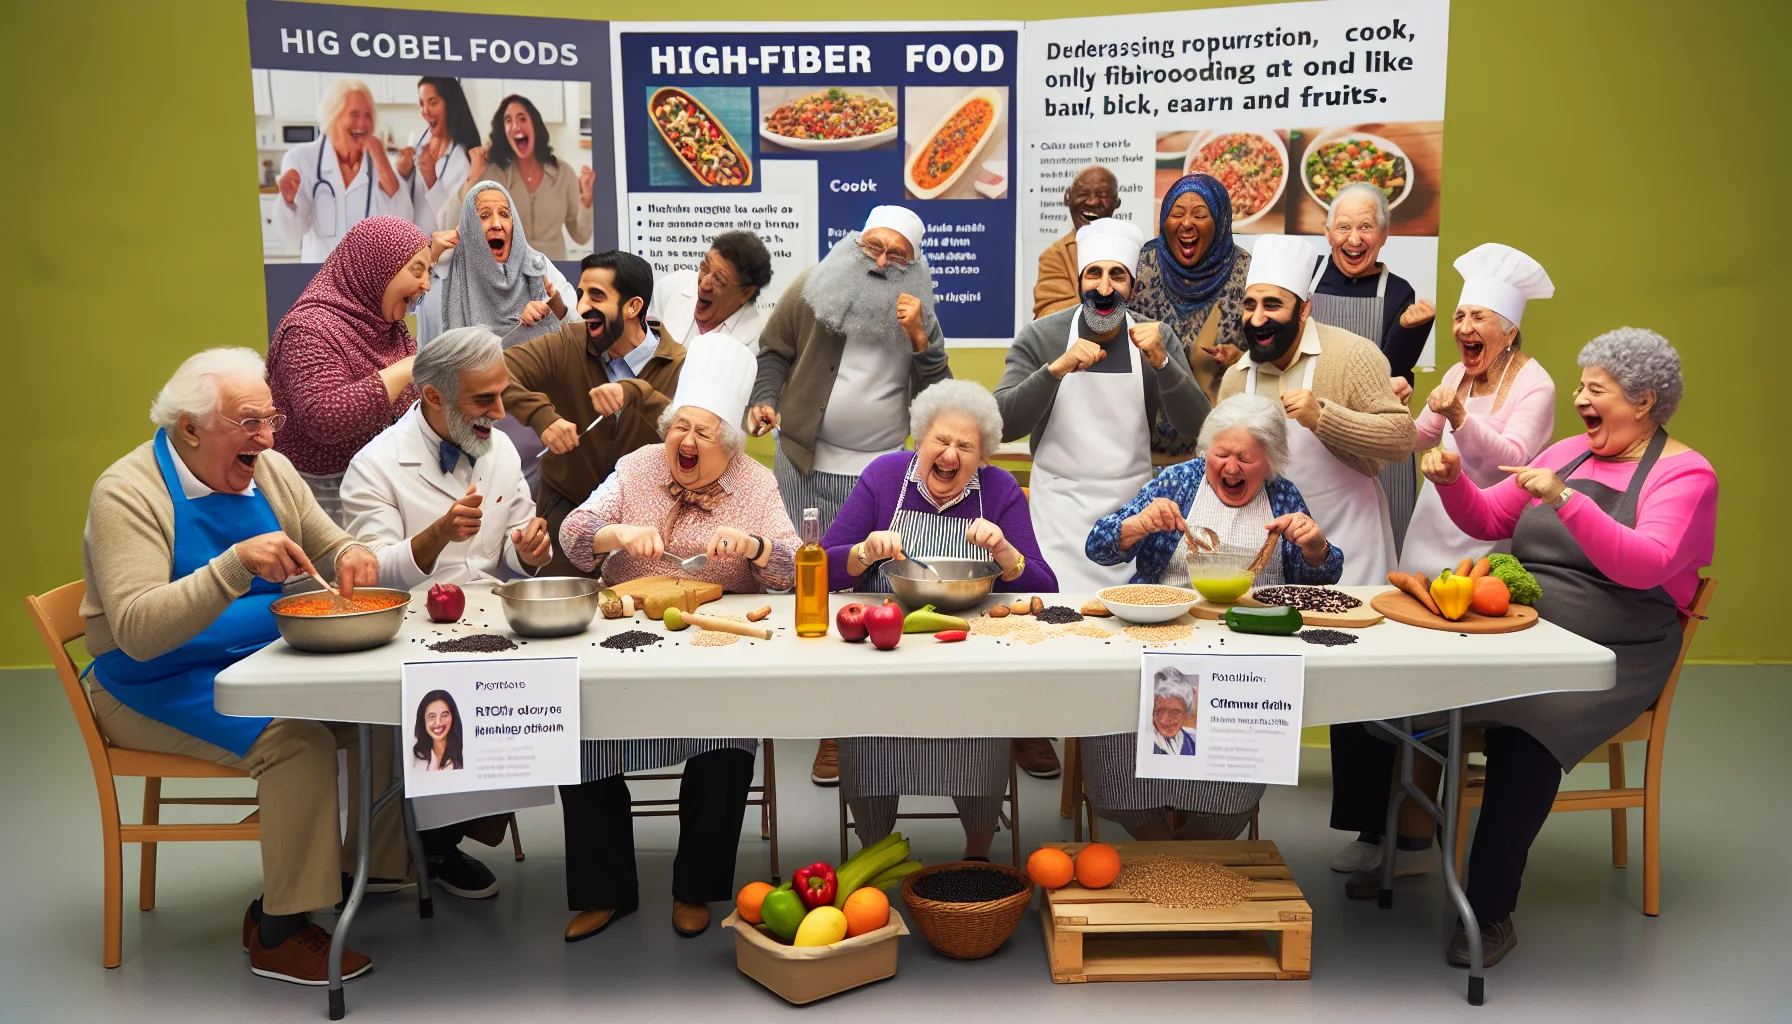 Create a humorous yet authentic representation involving aged individuals and dietary habits. Portray a lively scene at a community center, where you can see a group of elderly people of Caucasian, Hispanic, Black, Middle-Eastern and South Asian descent participating in a 'high-fiber food' cook-off. Some of the participants are trying to cook using only fibrous foods like beans, whole grains, and fruits. Others are humorously struggling, trying to chop the vegetables or figure out the recipe. Location decorations include banners promoting healthy eating and posters giving information about diet management for PCOS.